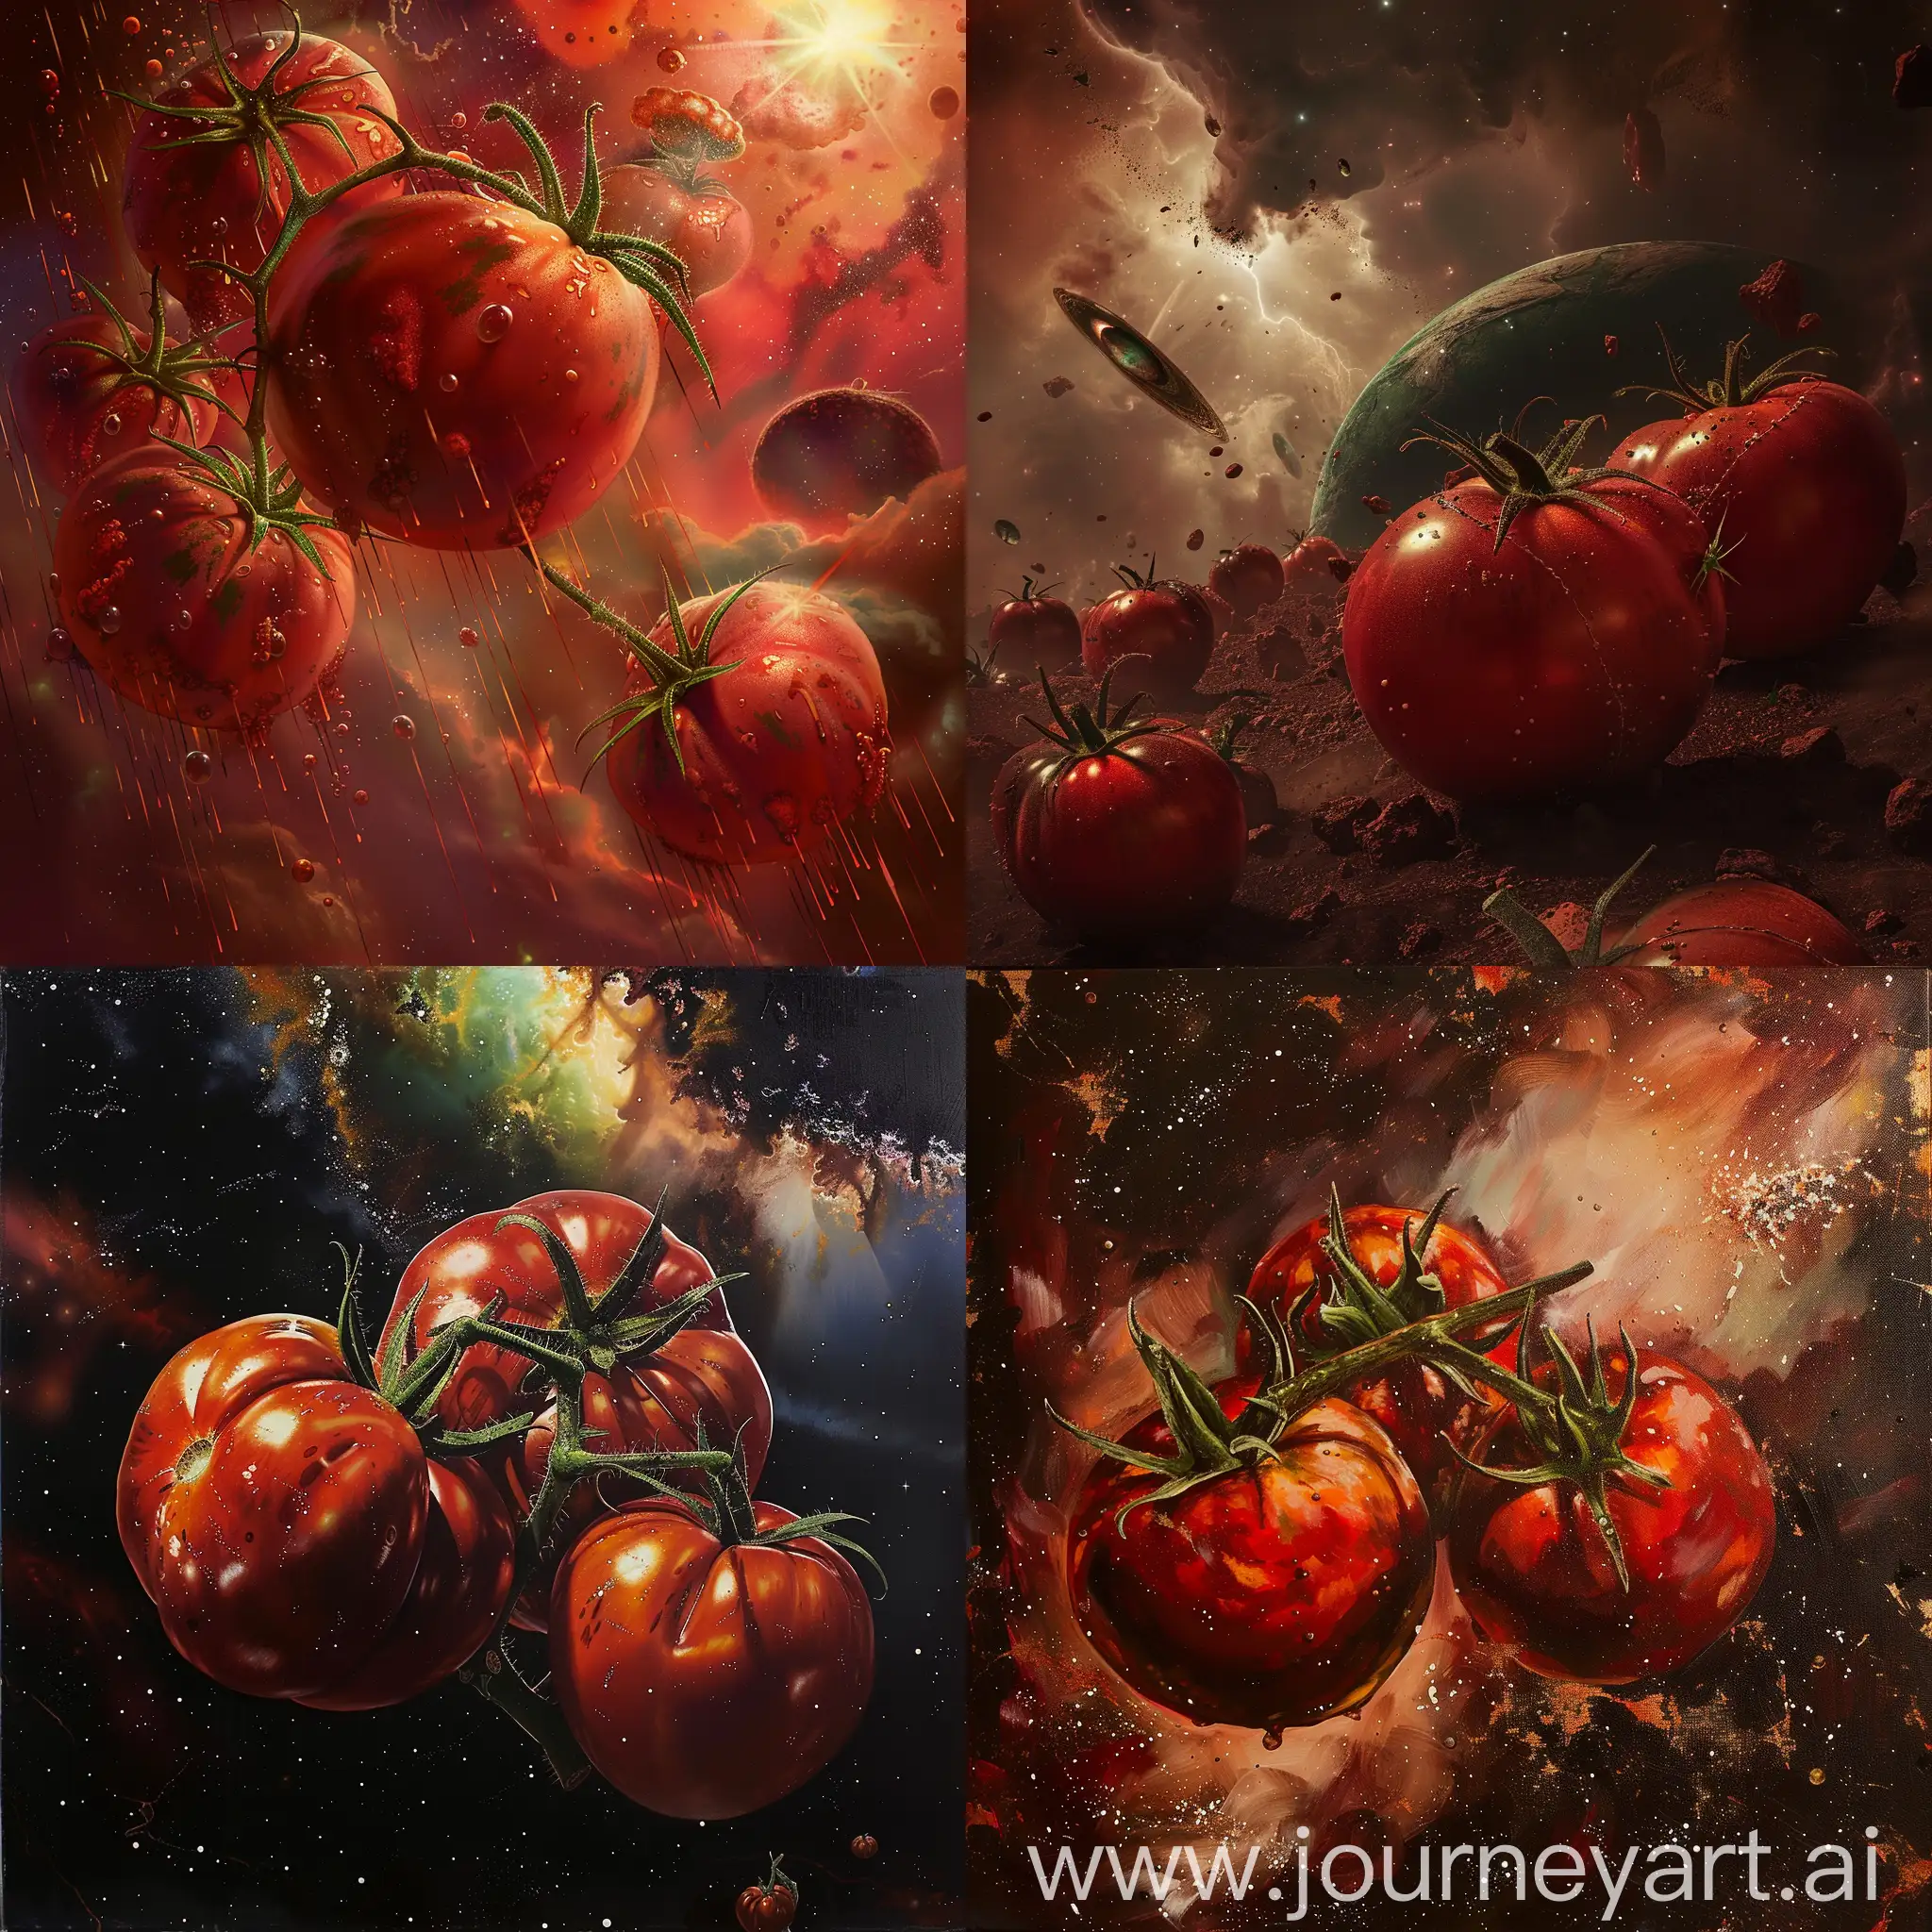 Invasion-of-Killer-Tomatoes-from-Distant-Space